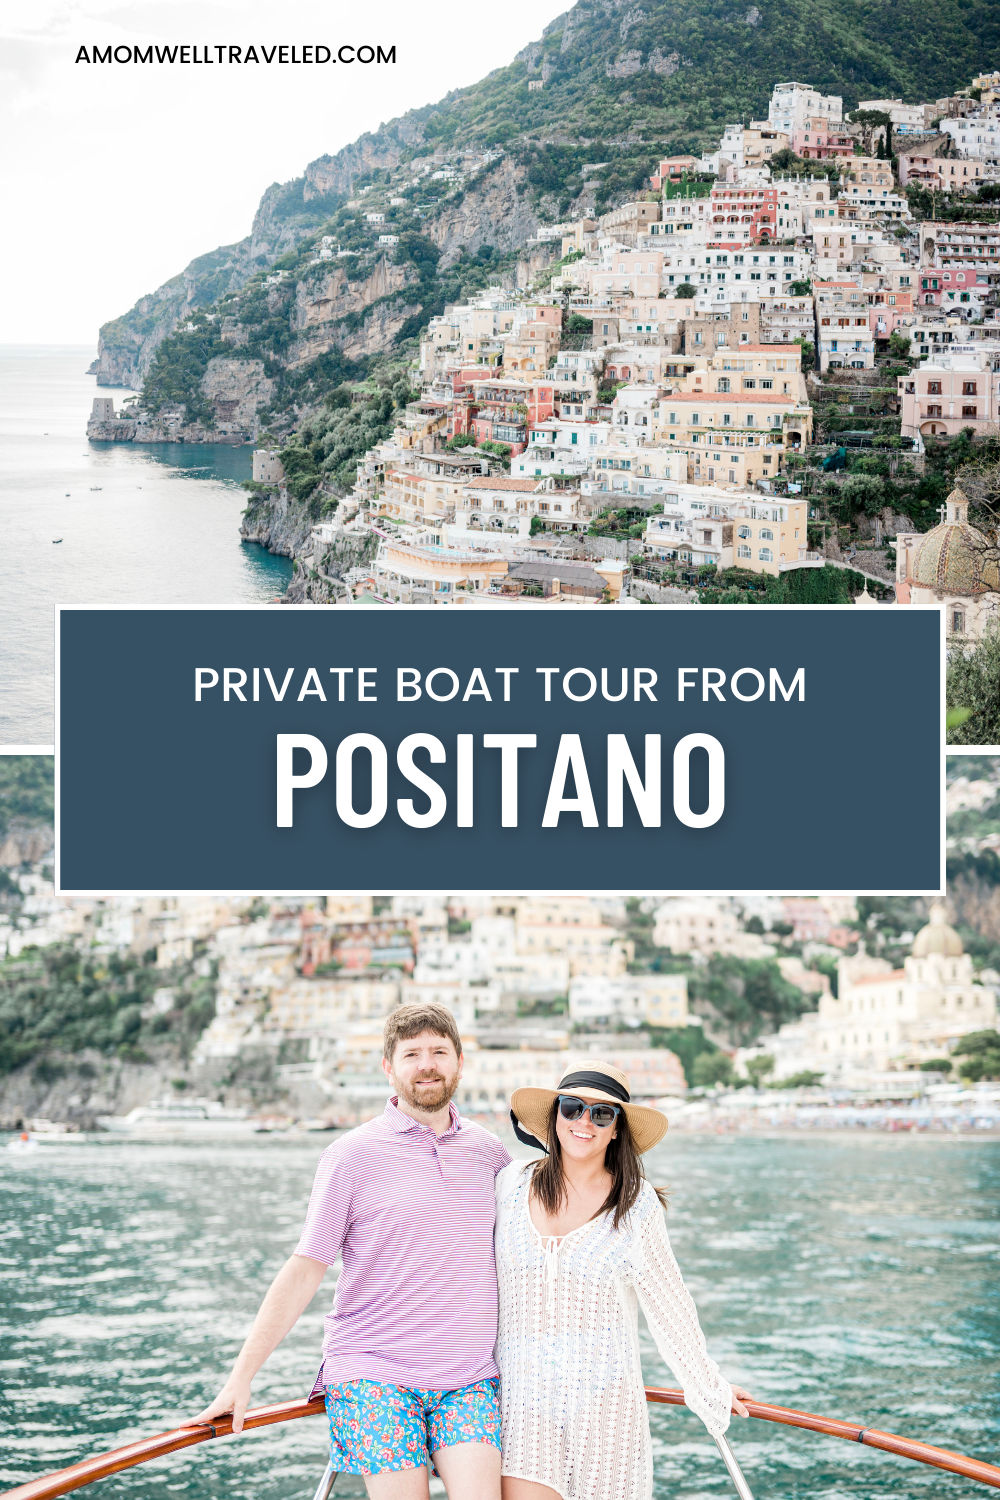 Everything you need to know about a private boat tour from Positano to Capri or Amalfi Coast pinterest pin from A Mom Well Traveled blog